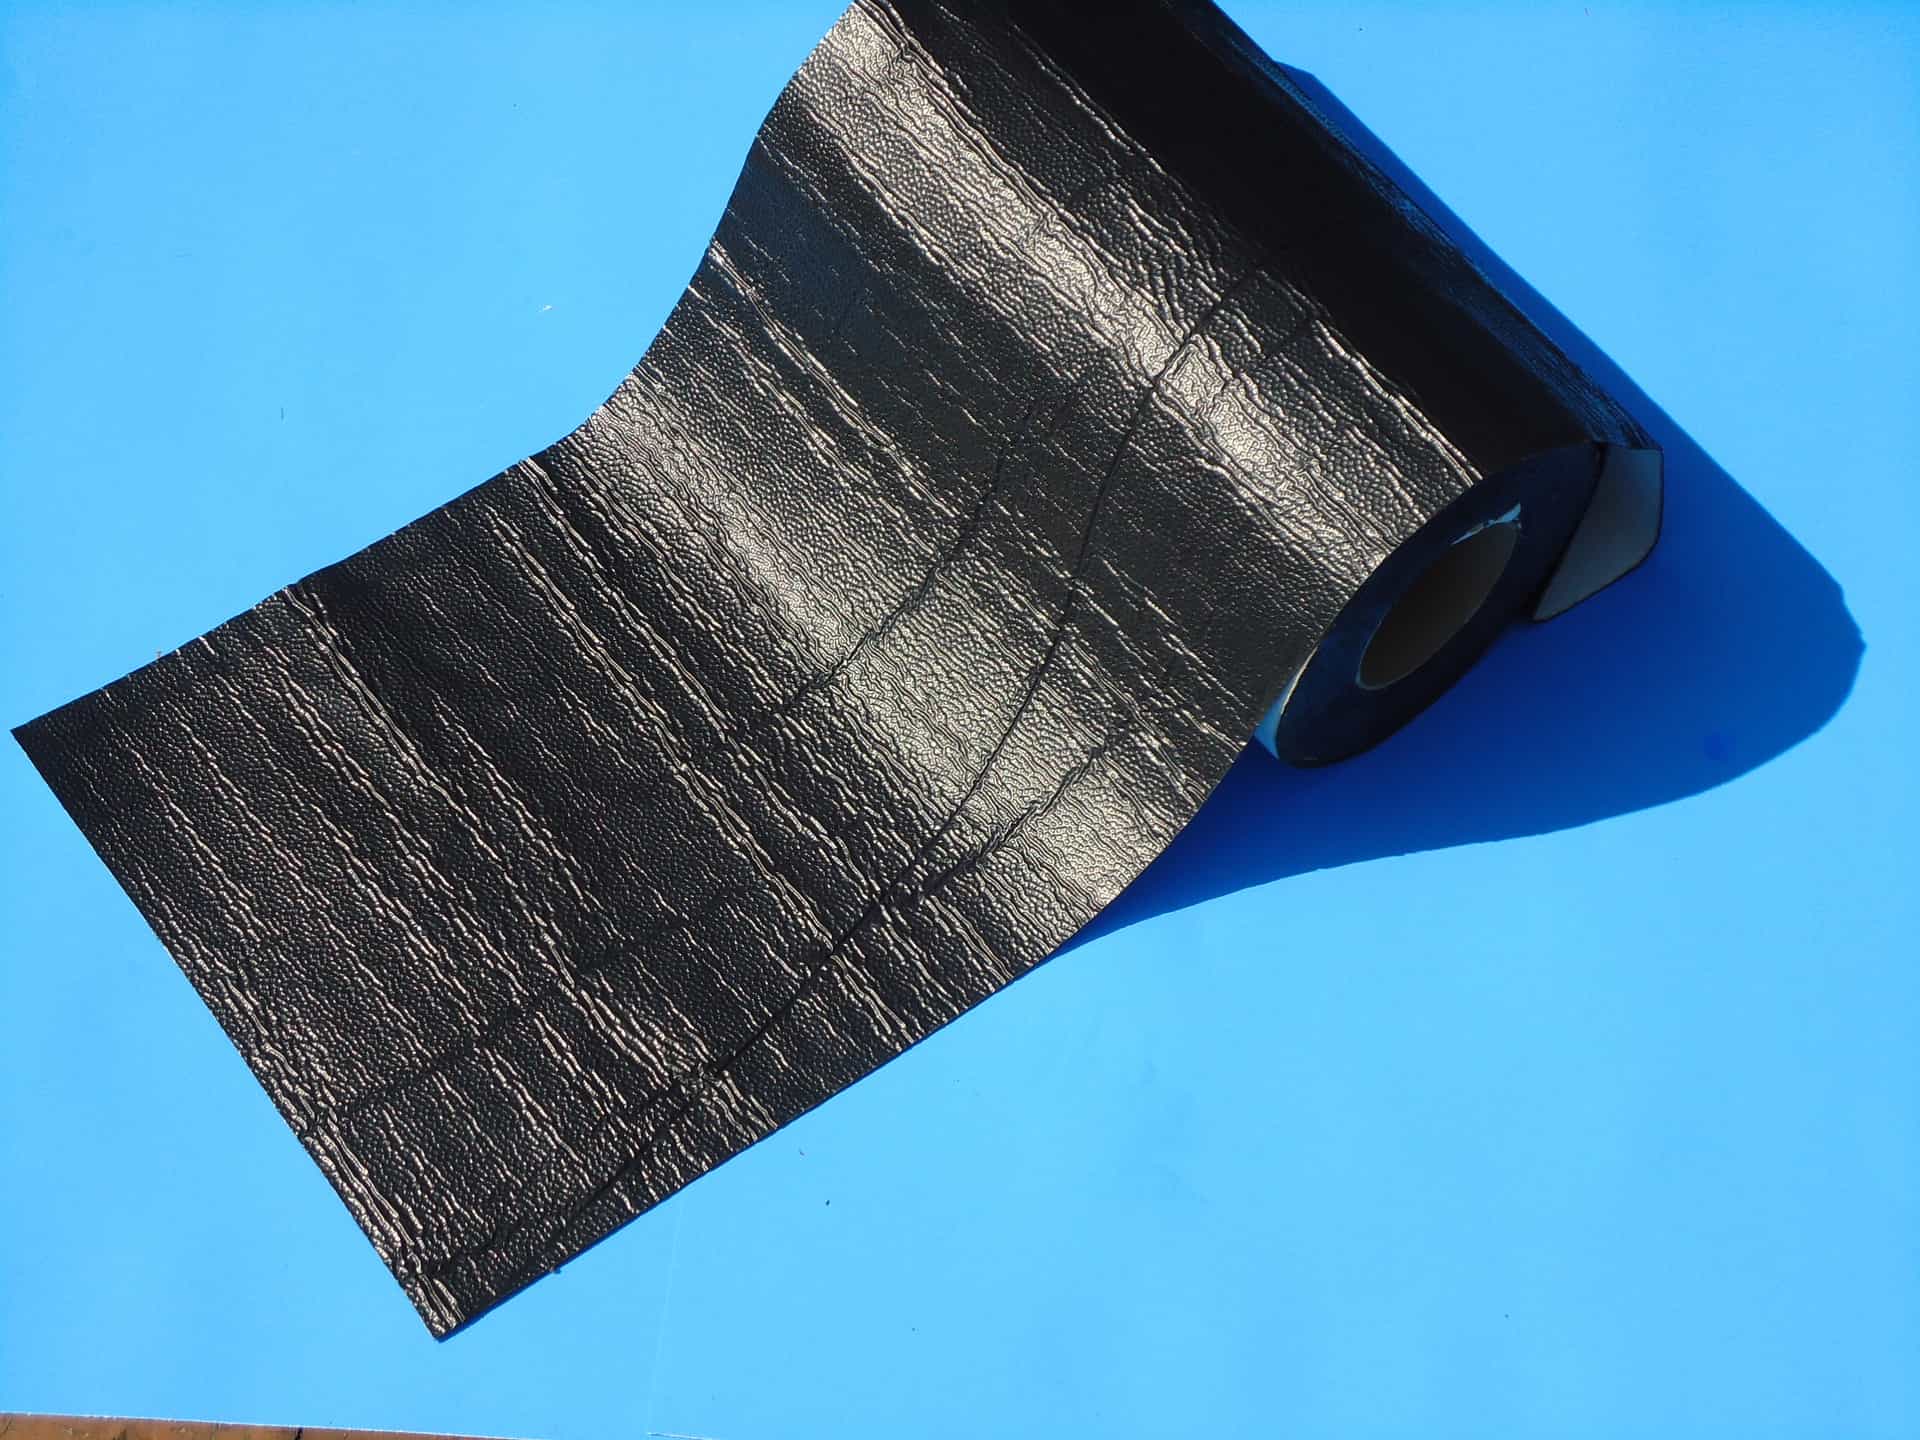 A roll of black duct tape on top of a blue surface.